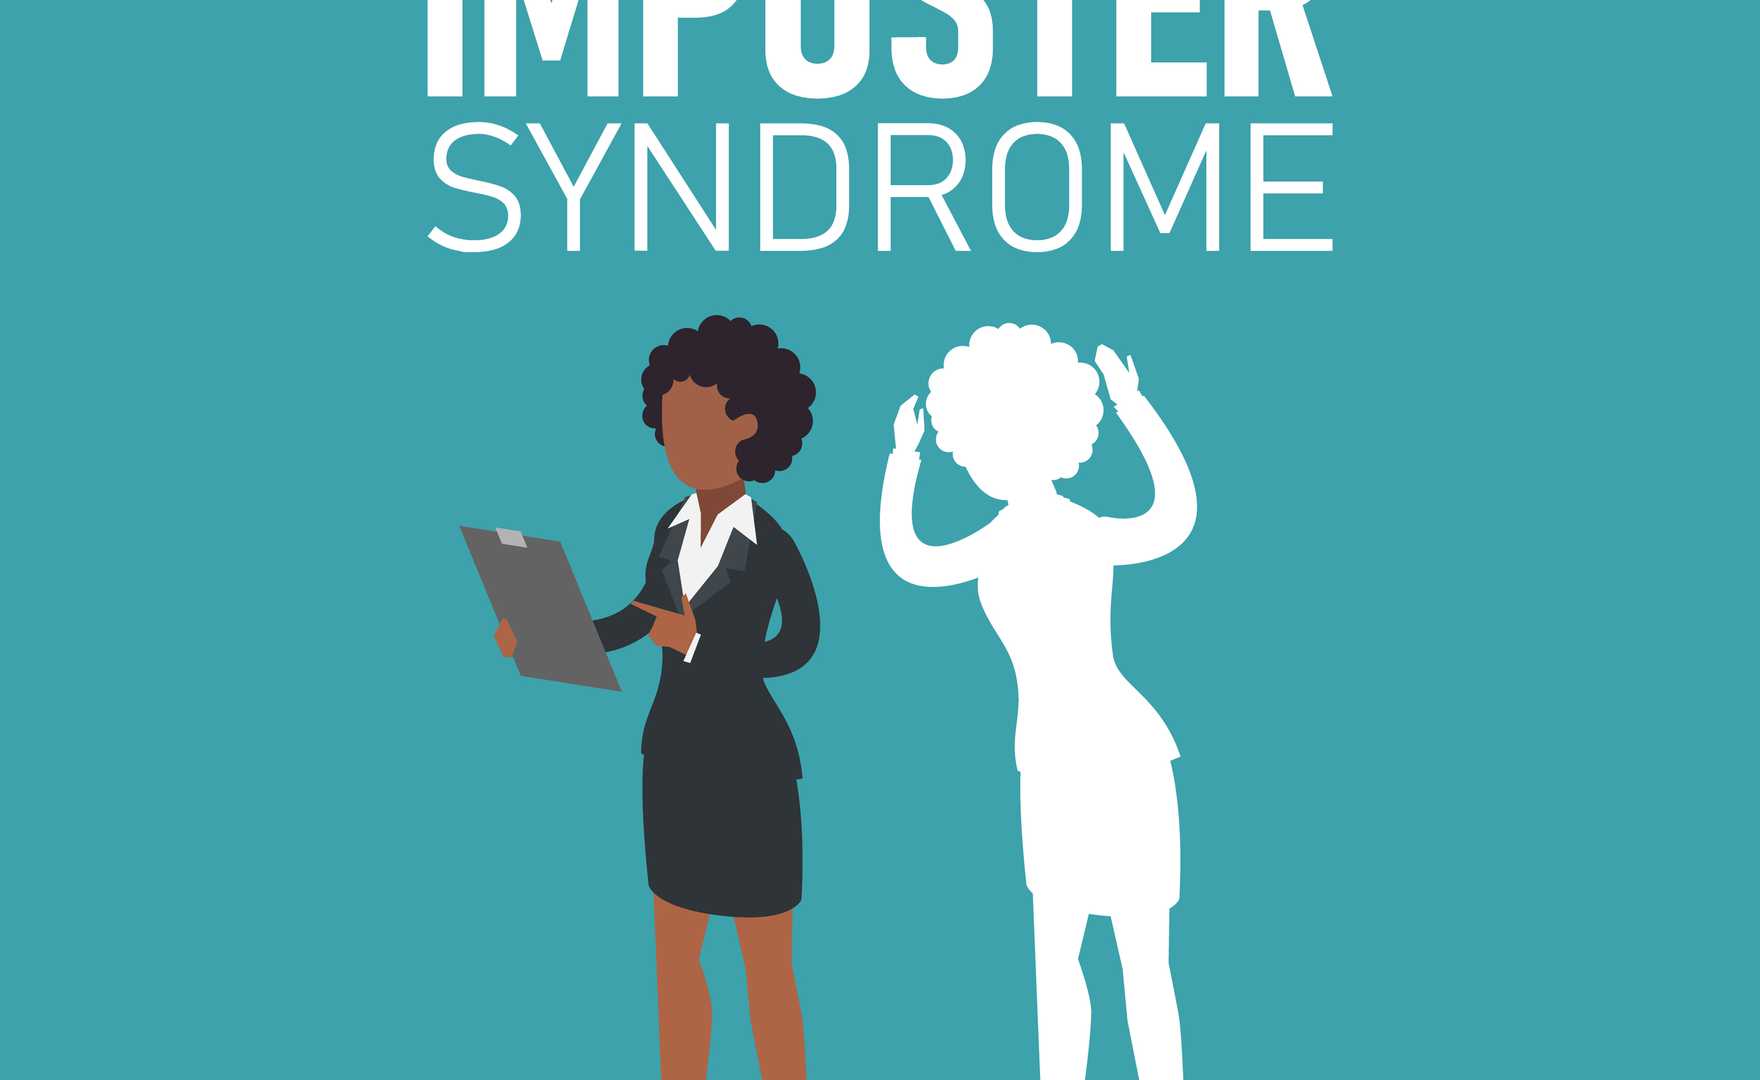 Exploring lived experiences of imposter syndrome